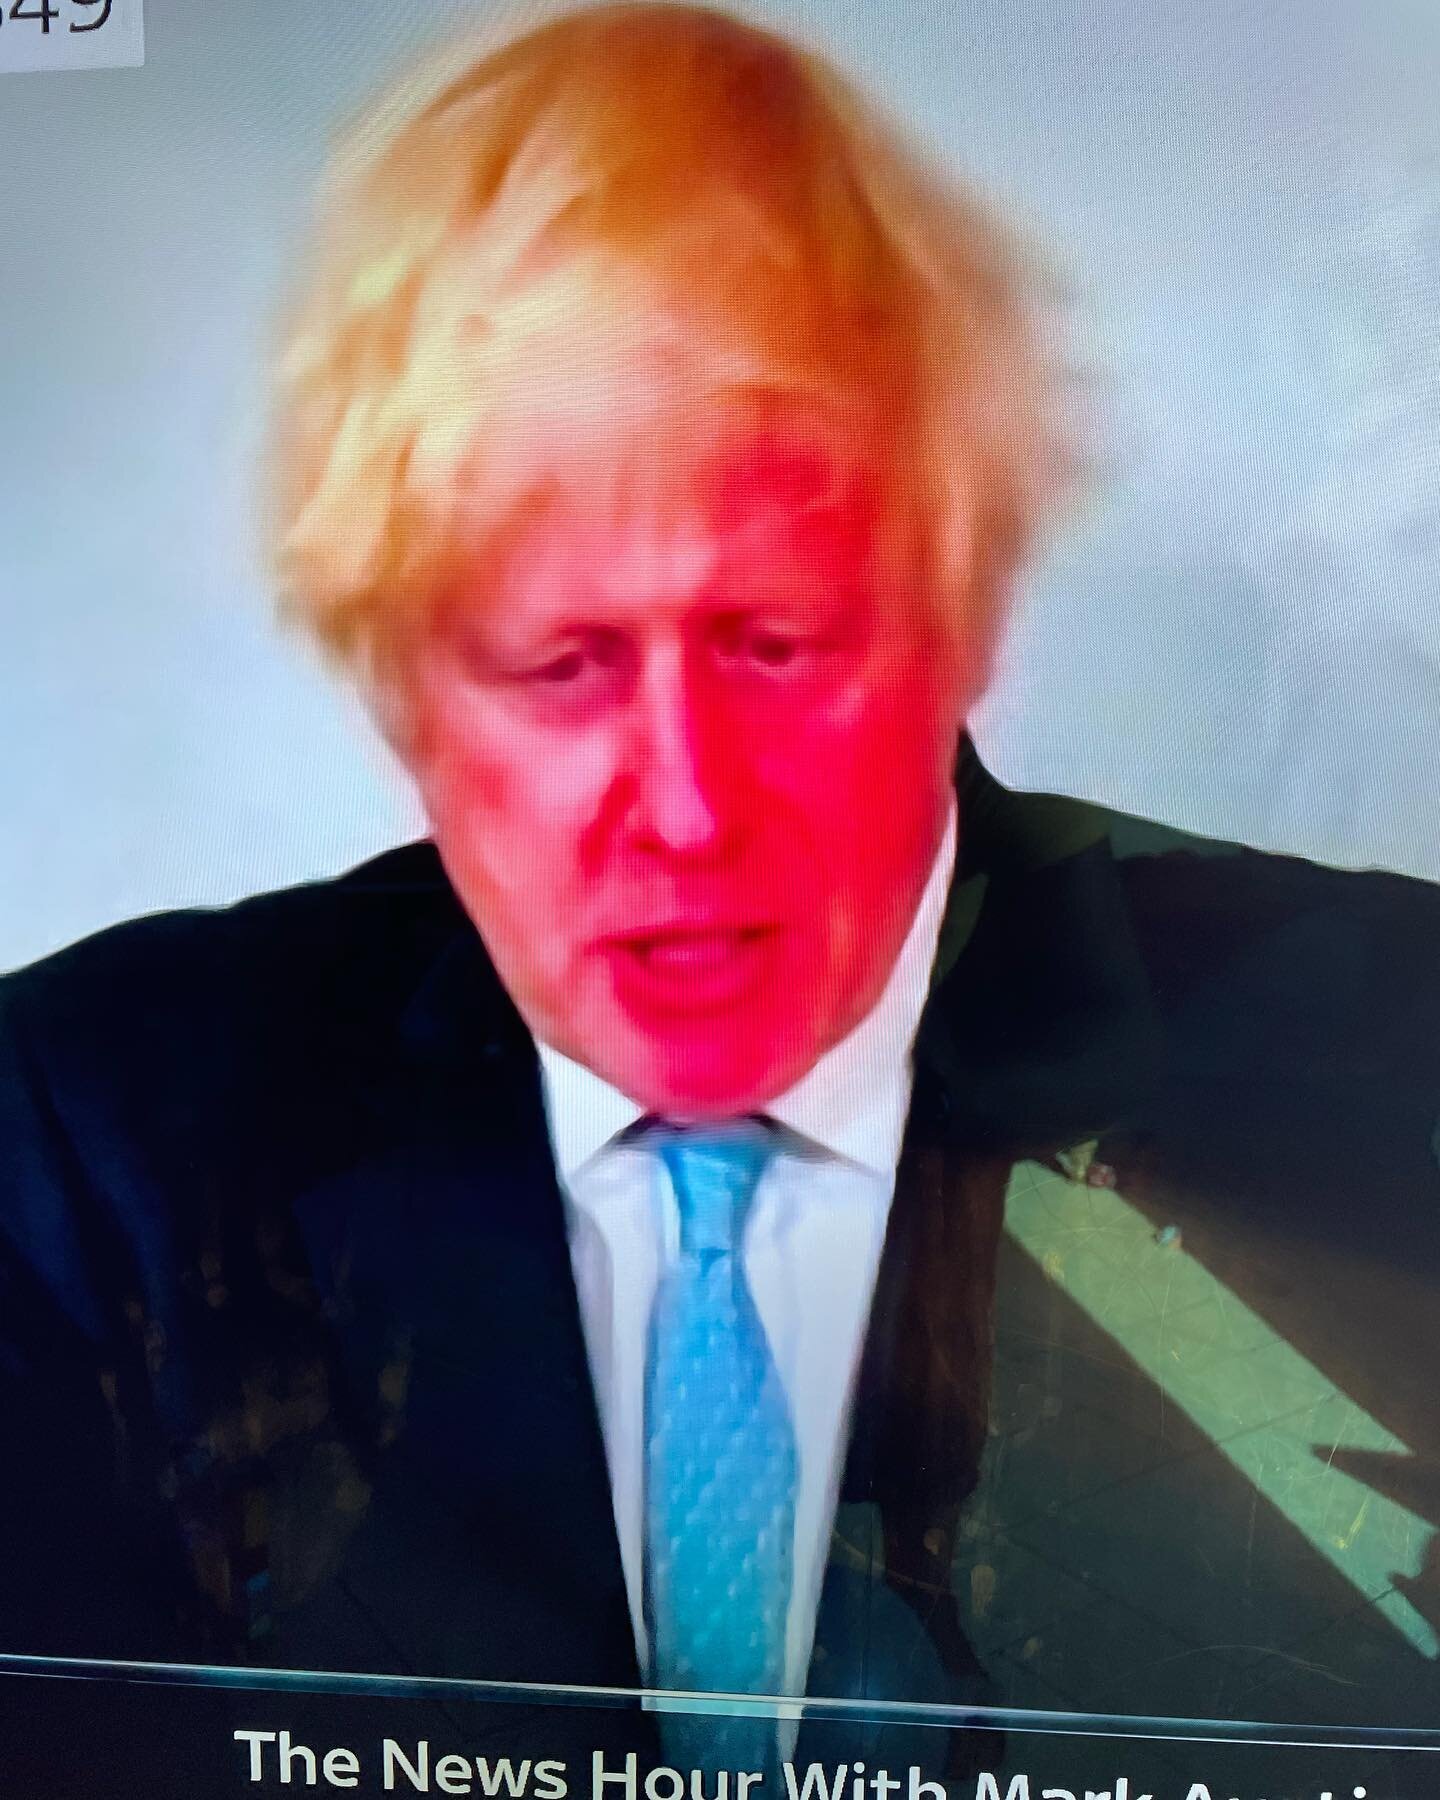 Oh dear! @borisjohnsonuk 
⠀
Dealing with sunburn&hellip;. Some socially distanced tips from behind my mask 😉
⠀
❗️keep the skin cool - cool showers and flannels will help to take the heat out of the skin.
⠀
❗️apply a soothing after sun lotion - gel t